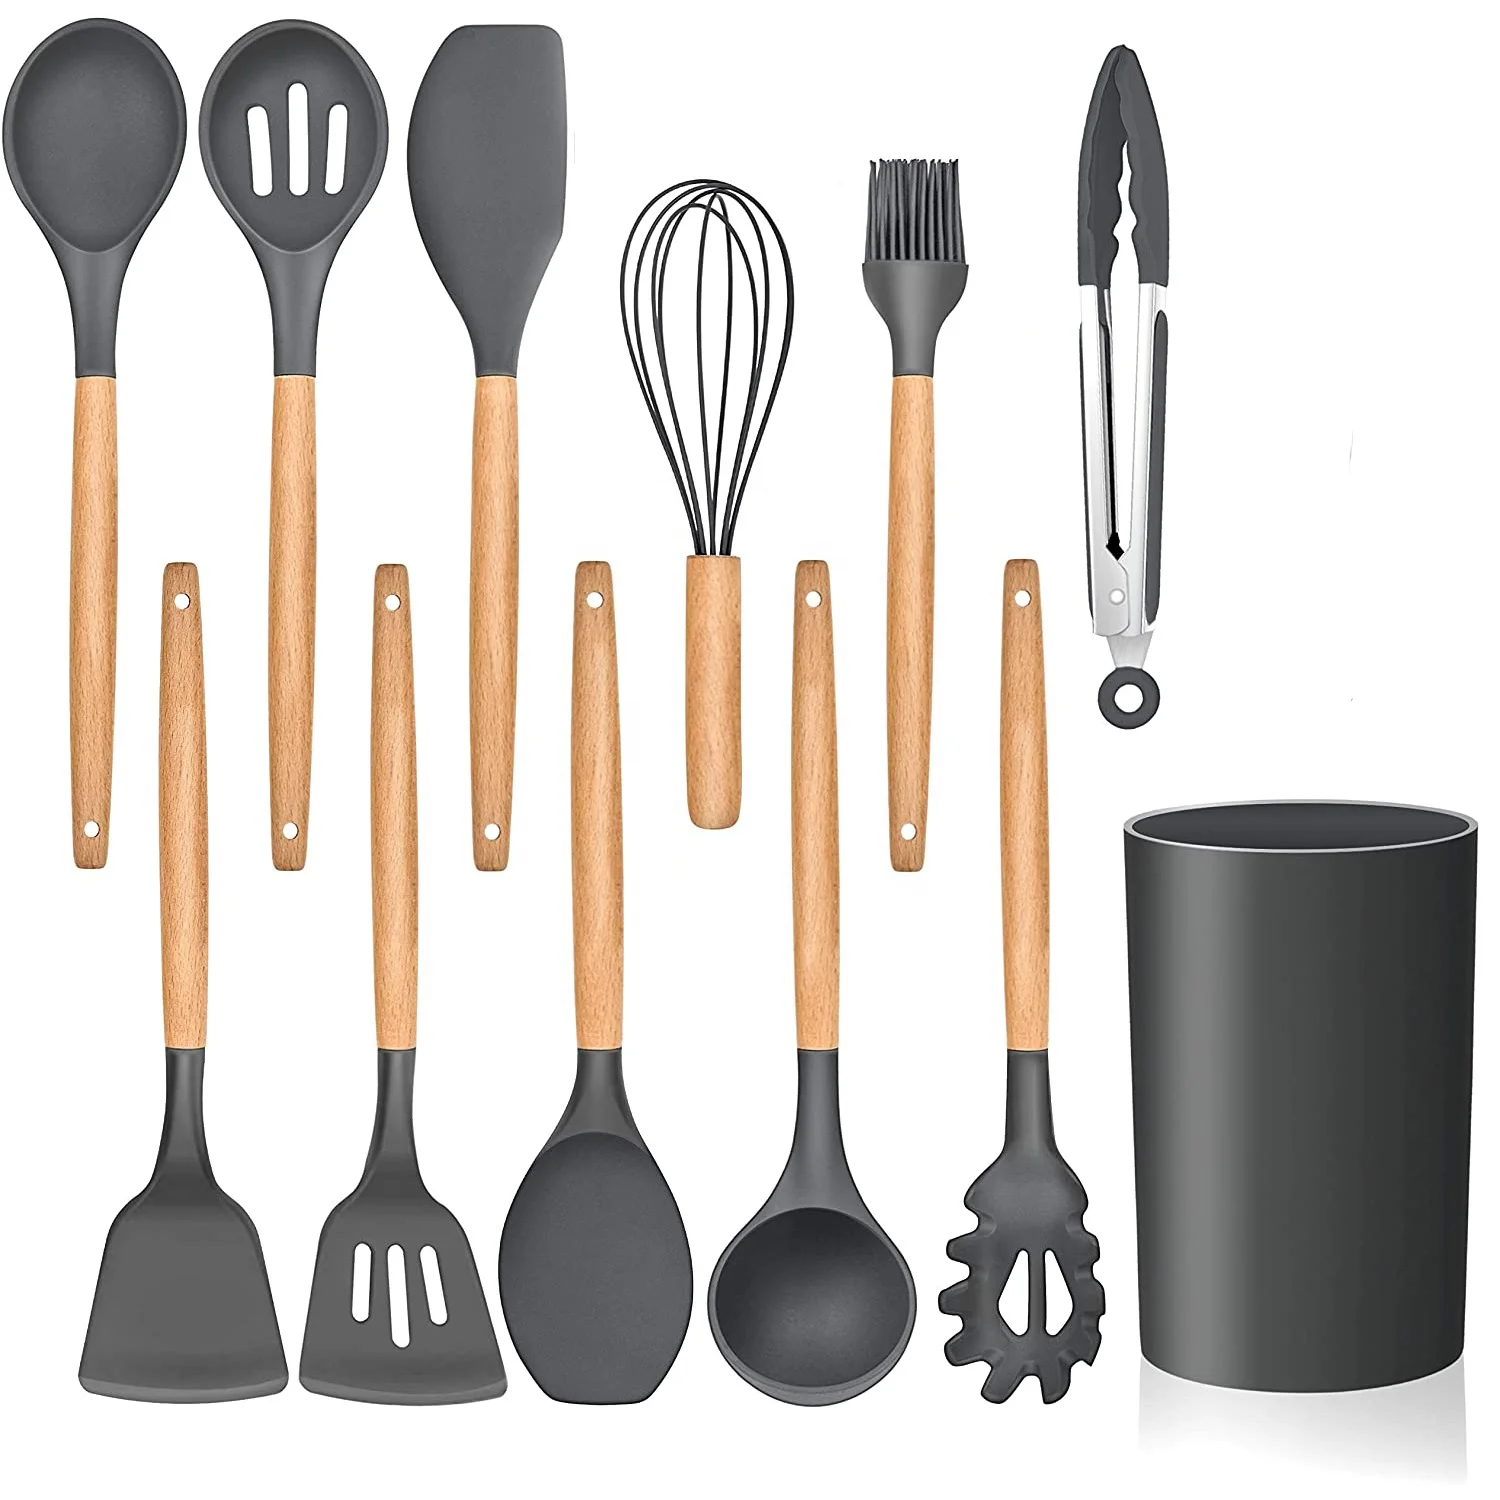 

Grey Silicone Cooking Utensils Kitchen Utensil Set Tools with Wood Handles